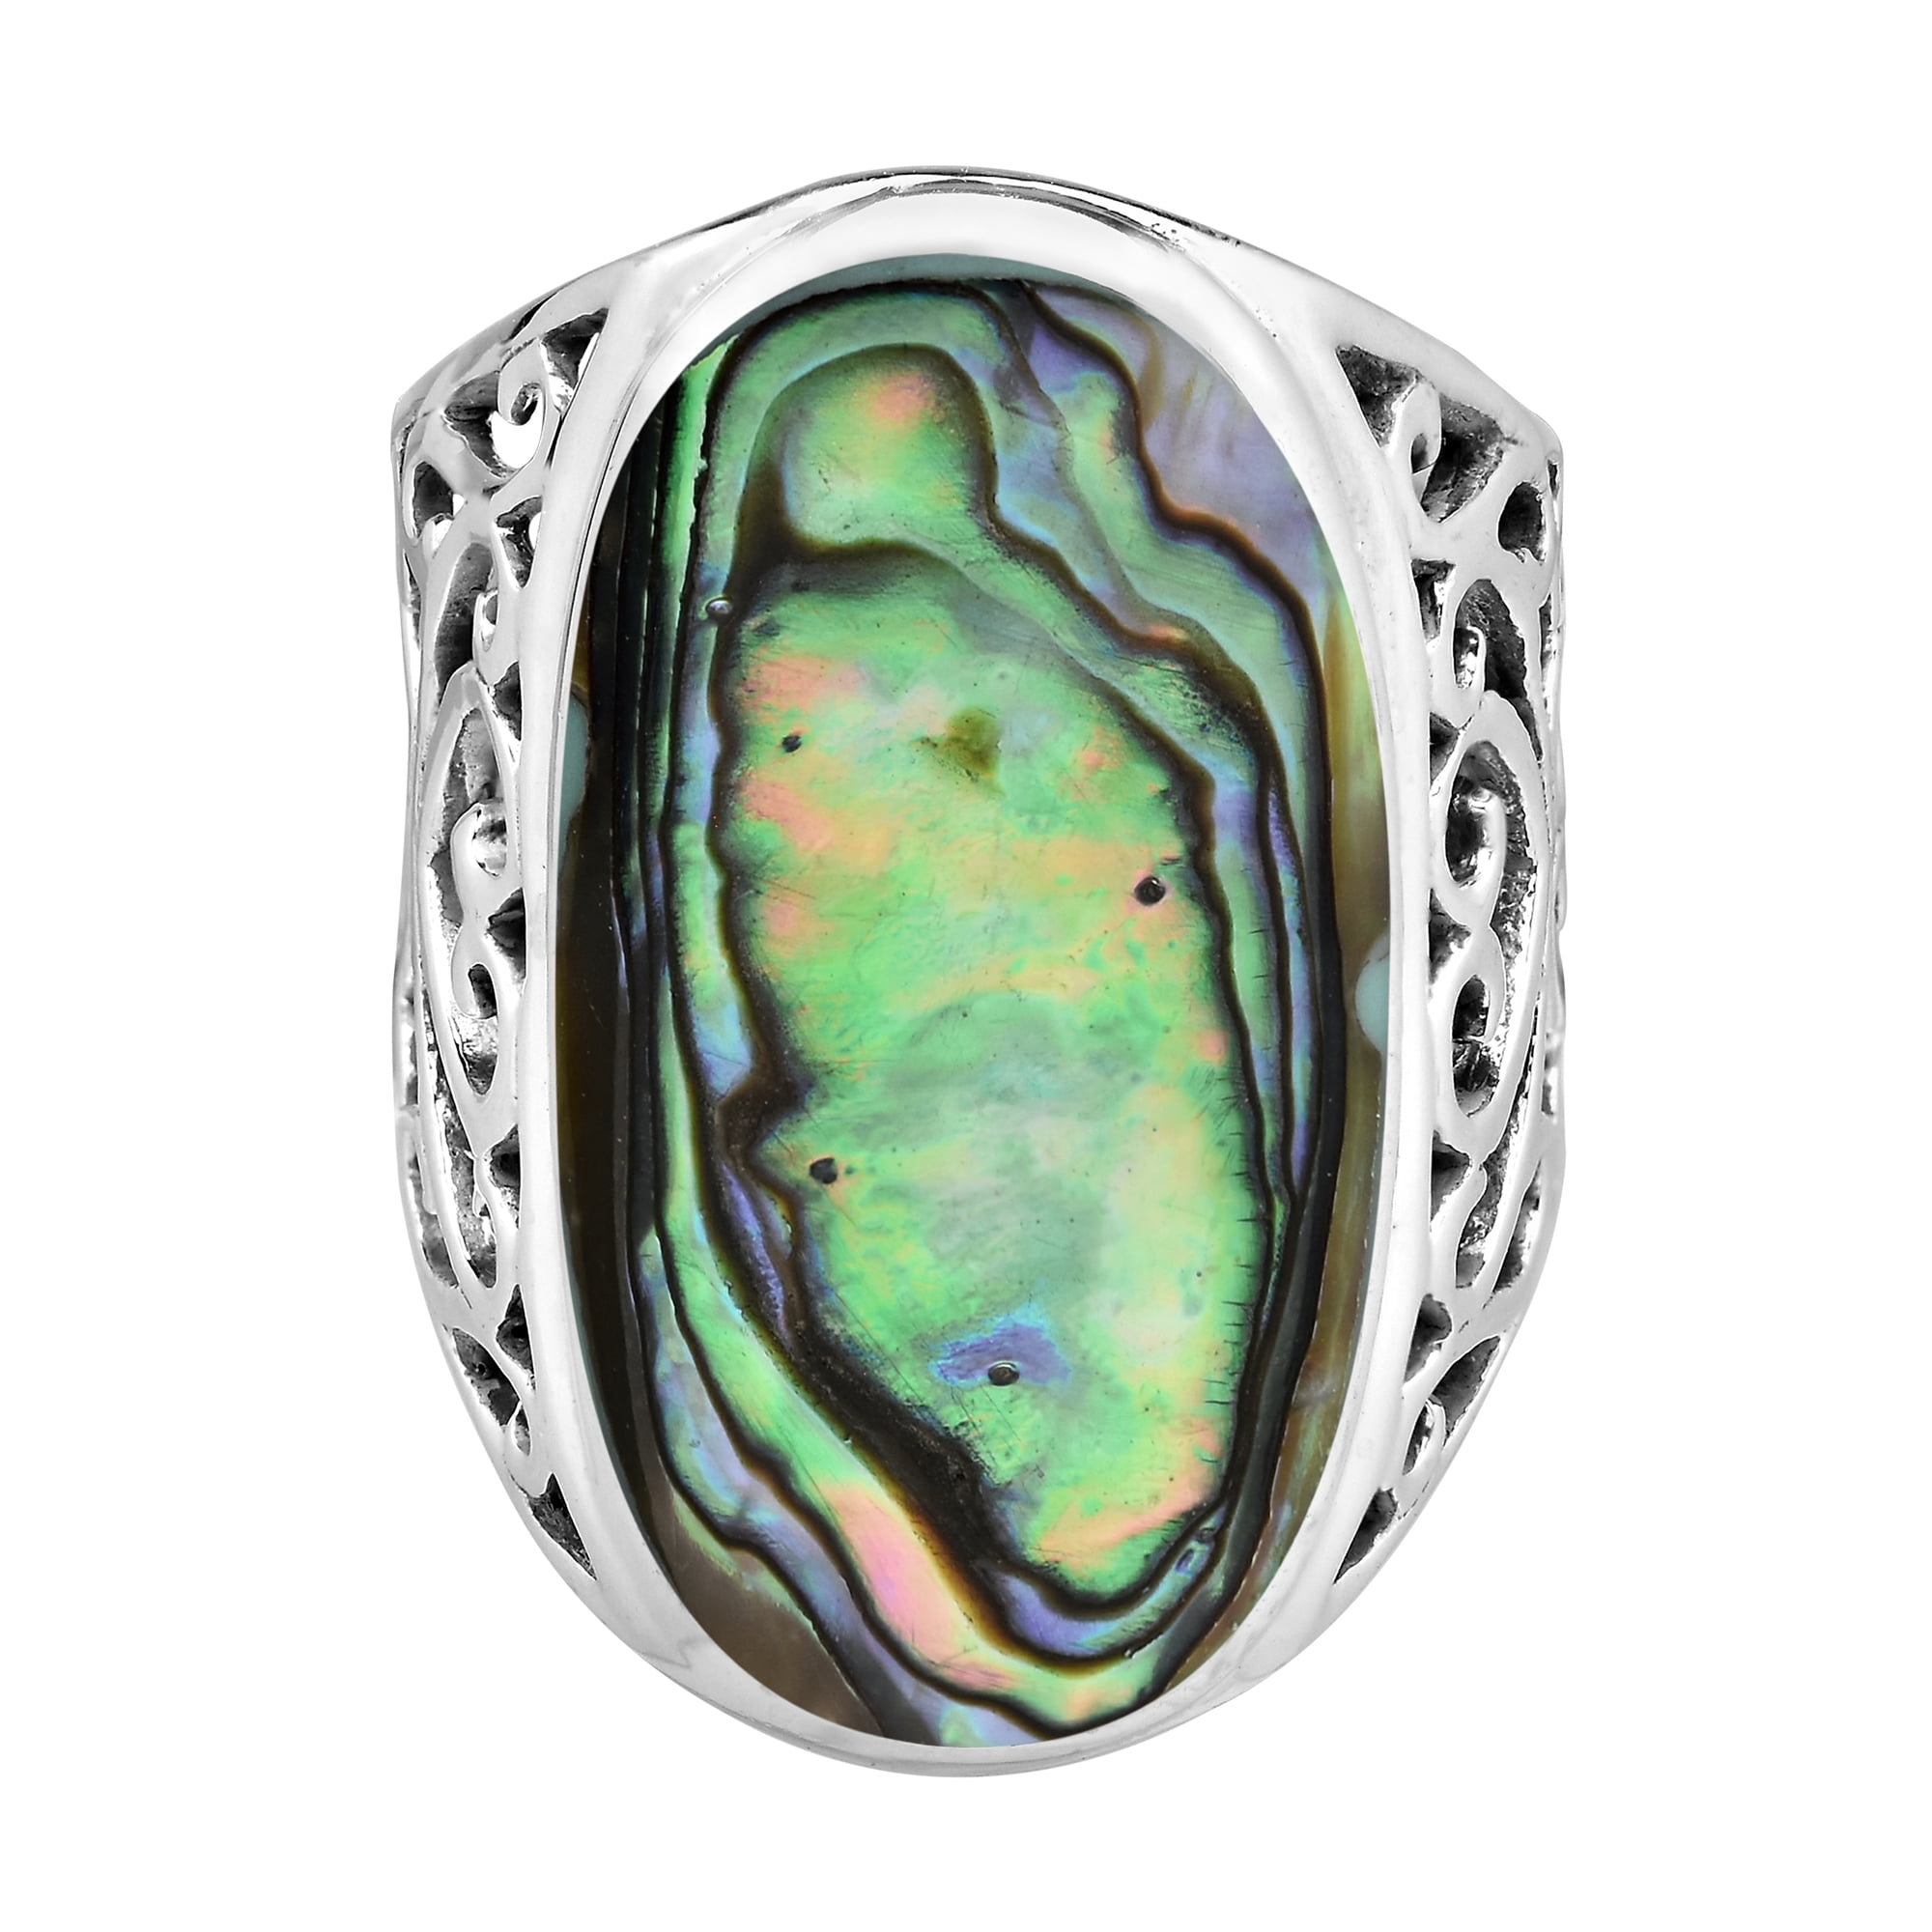 Details about   Bold Large Oval Green Turquoise .925 Silver Intricate Heart Filigree Ring-9 